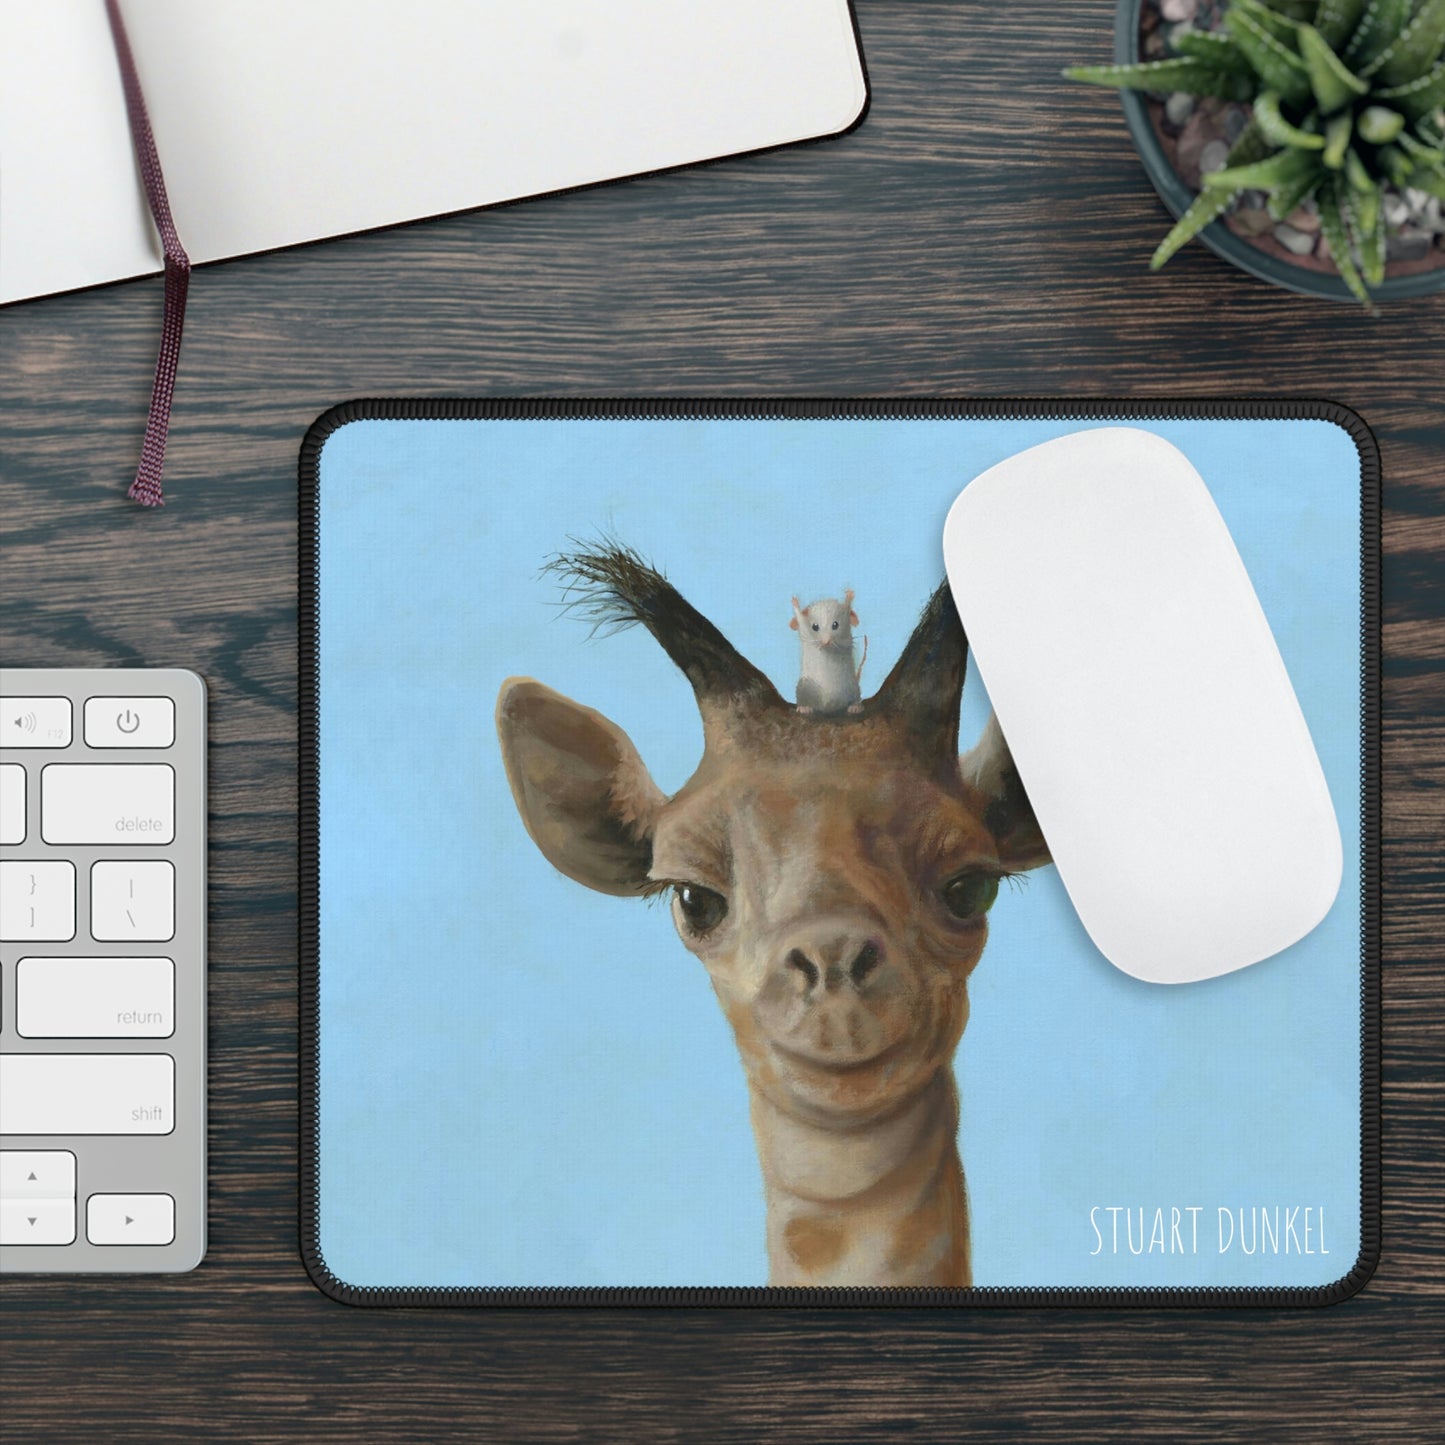 Stuart Dunkel: "Being Tall" - Gaming Mouse Pad